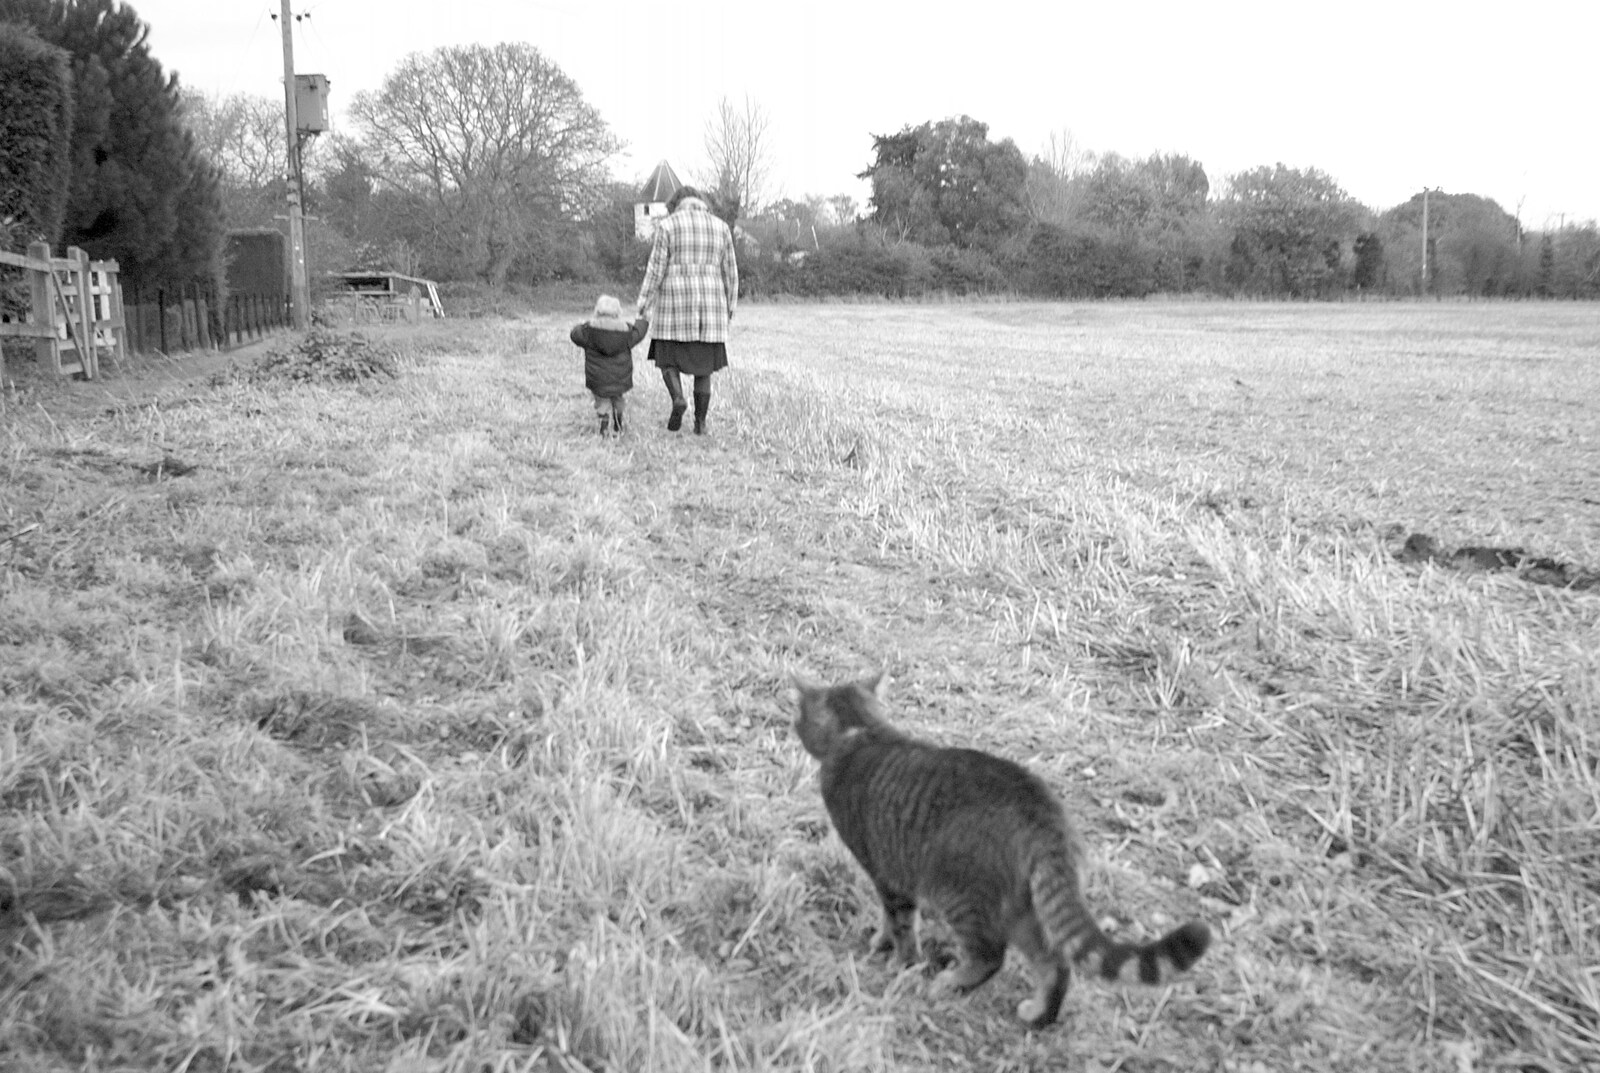 Boris mills around as Fred and Isobel wander off from Apple Pressing and Amandine's Jazz, Diss, Norfolk - 21st November 2010